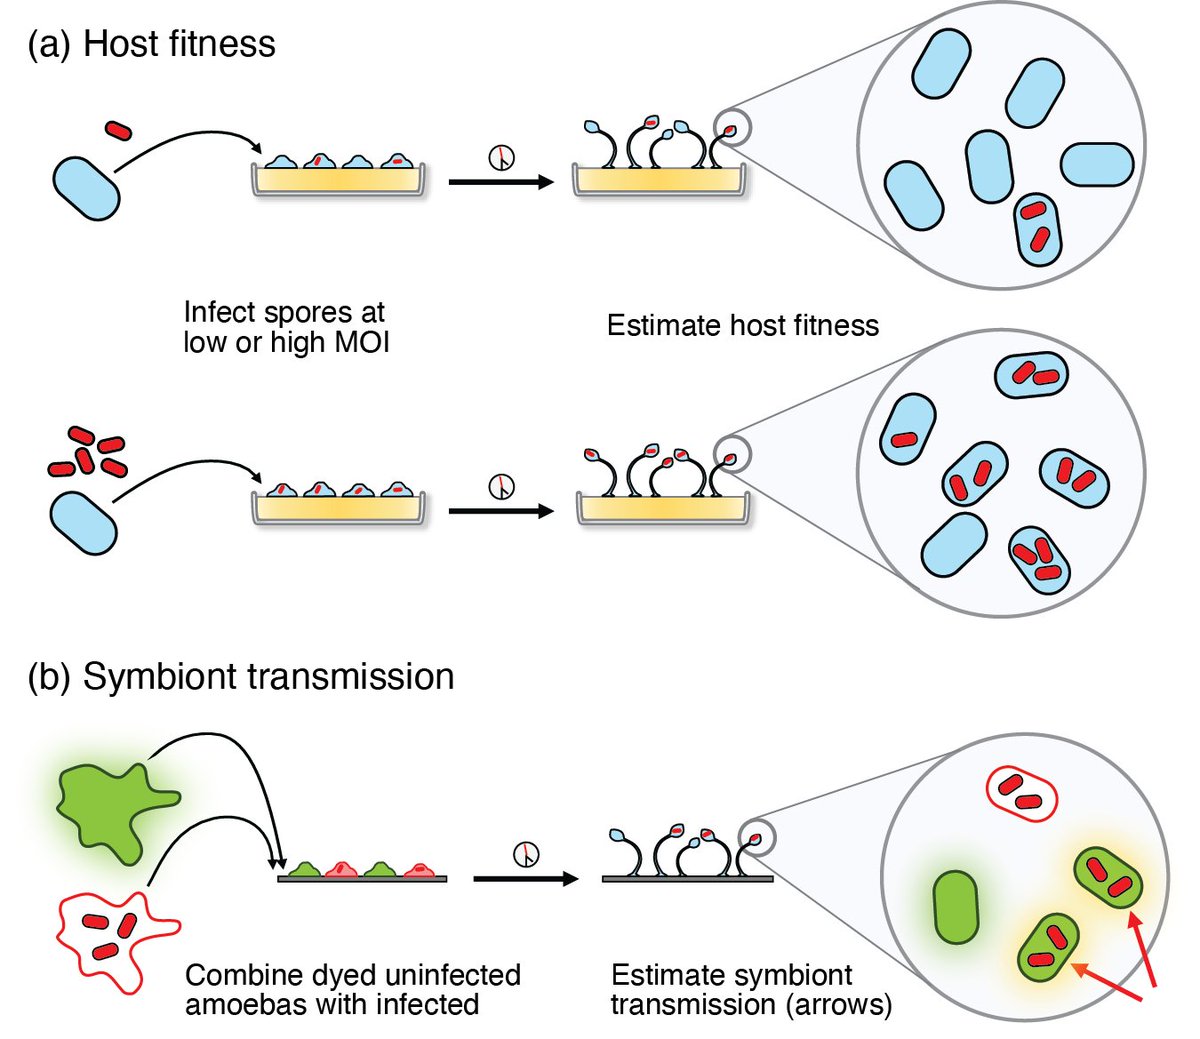 Social amoebas prey on bacteria but individuals can also host bacterial symbionts. What contributes to patterns of facultative symbionts & what happens when hosts enter the social life cycle stage? doi.org/10.1093/evlett… Now in @EvolLetters by @SuegeneNoh, @Halobacterium, et al